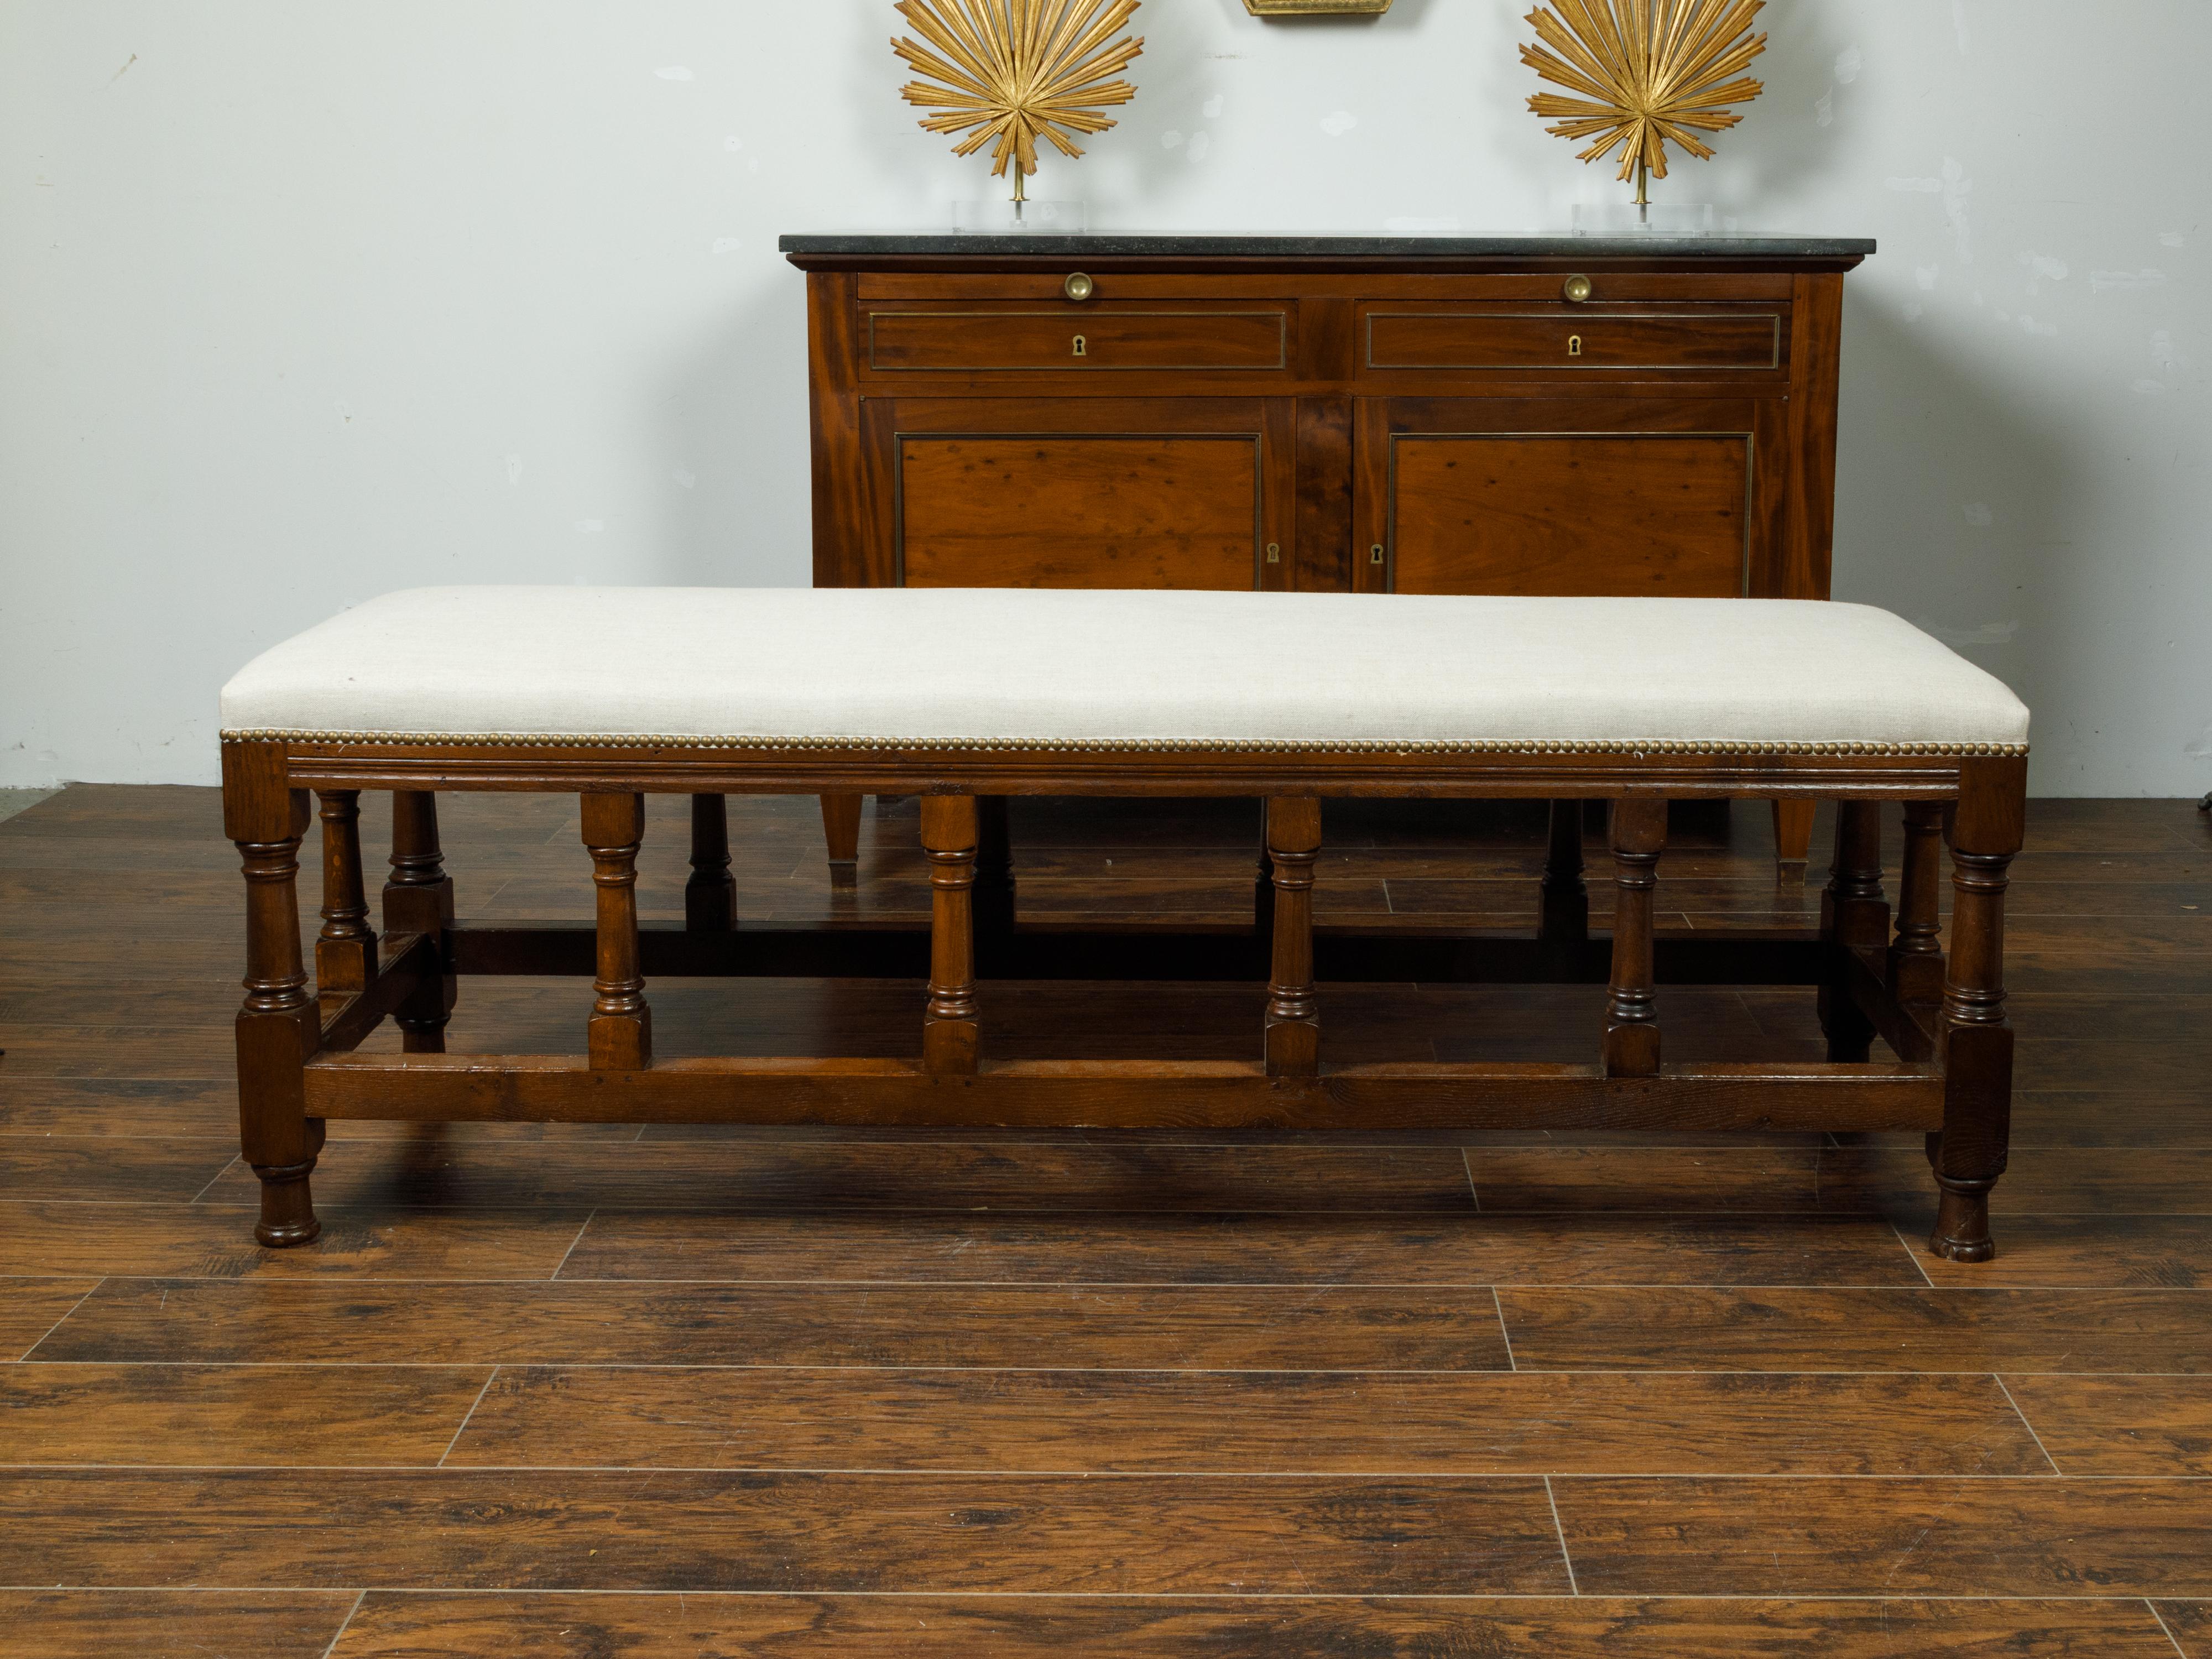 An English oak bench from the late 19th century, with turned legs and new upholstery. Created in England during the last quarter of the 19th century, this oak bench features a long rectangular seat newly recovered with a neutral toned fabric secured